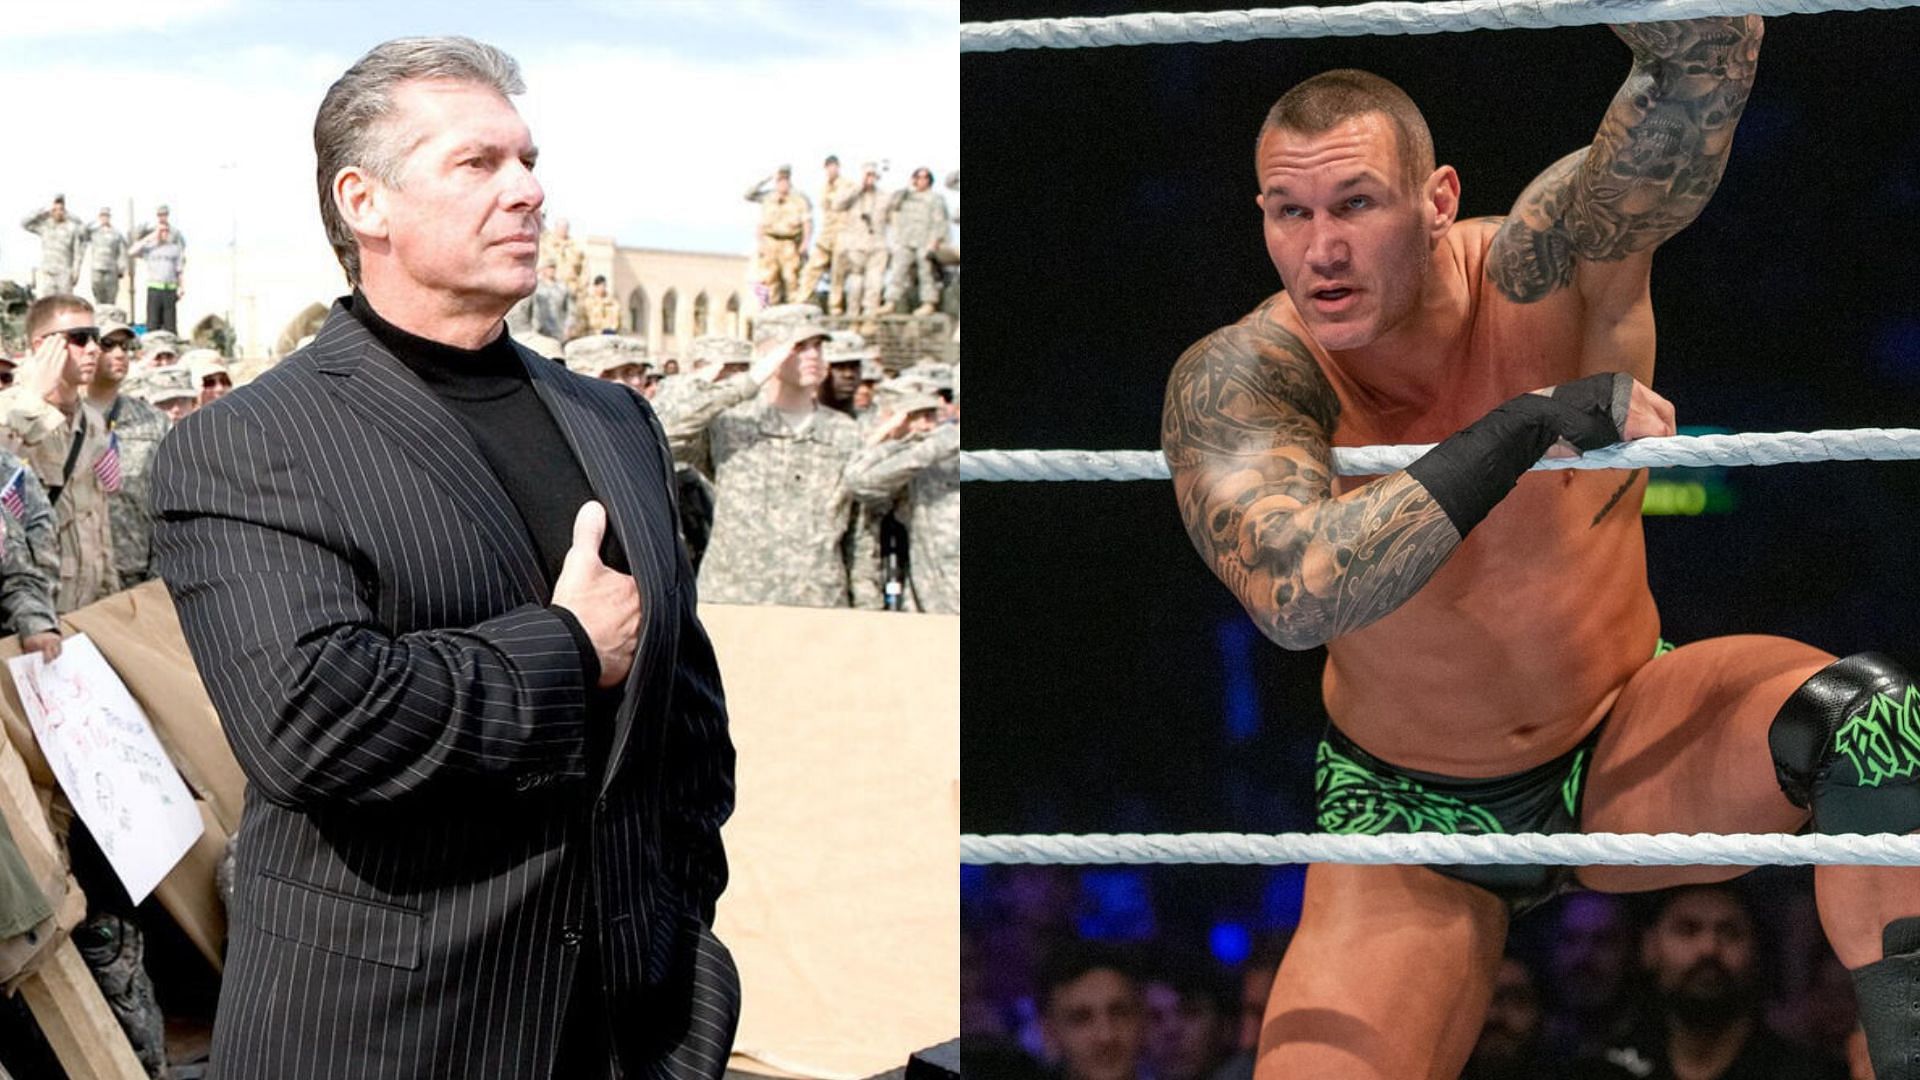 Randy Orton has a close relationship with Vince McMahon